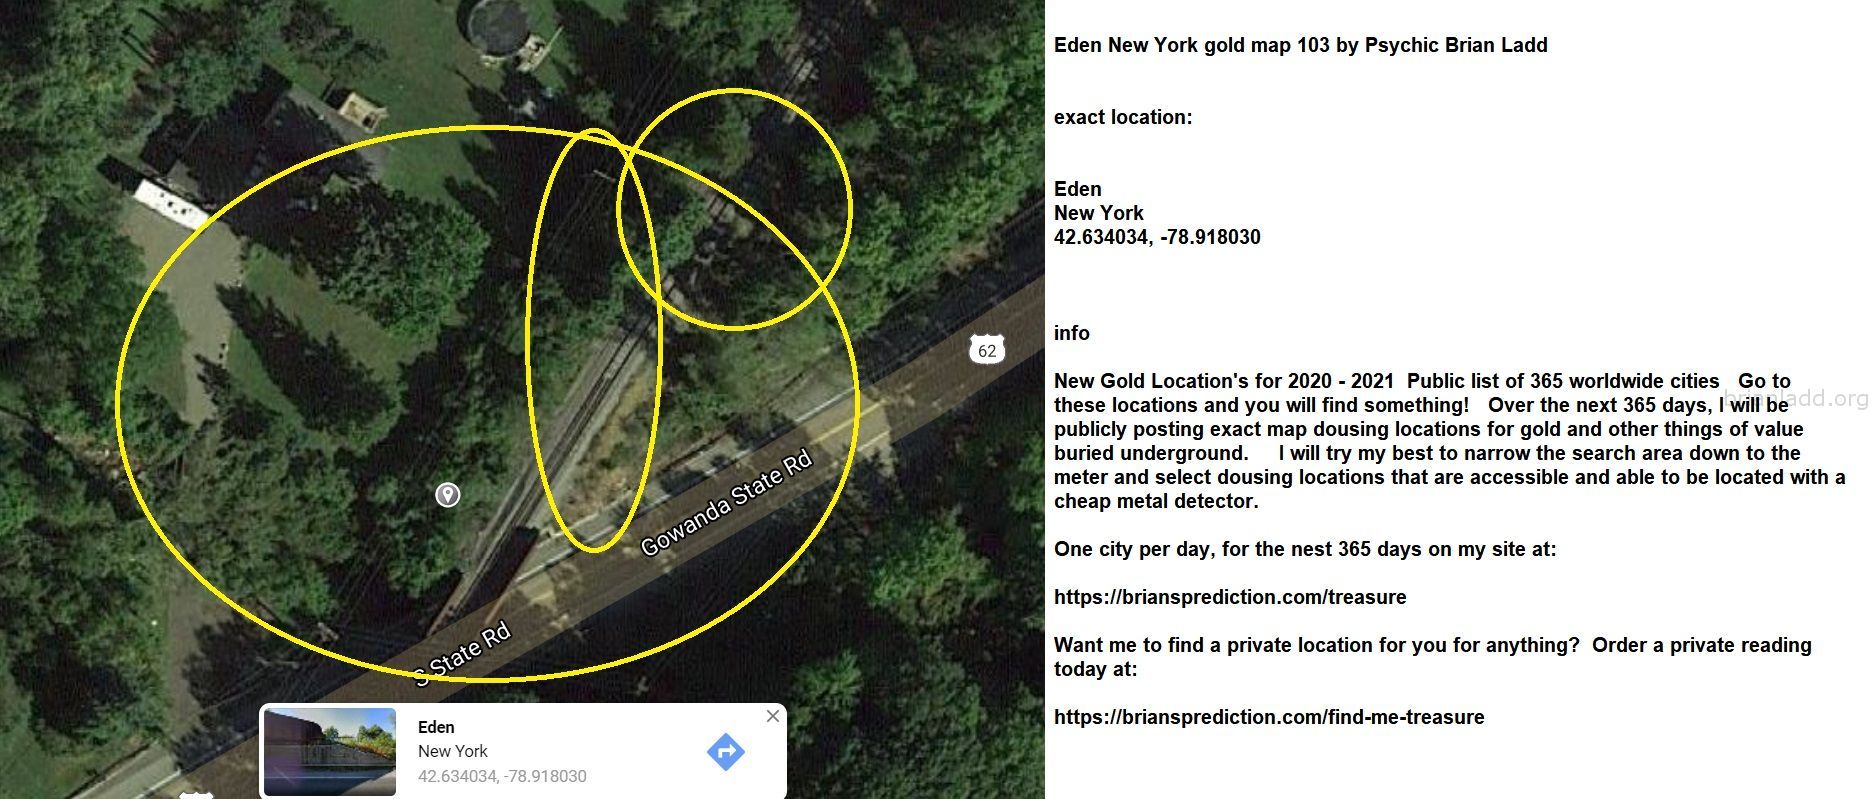 Eden New York gold map 103 by Psychic Brian Ladd
New Gold Location's for 2020 - 2021  Public list of 365 worldwide cities   Go to these locations and you will find something!   Over the next 365 days, I will be publicly posting exact map dousing locations for gold and other things of value buried underground.     I will try my best to narrow the search area down to the meter and select dousing locations that are accessible and able to be located with a cheap metal detector. One city per day, for the nest 365 days on my site at:  https://briansprediction.com/treasure  Want me to find a private location for you for anything?  Order a private reading today at:  https://briansprediction.com/find-me-treasure
